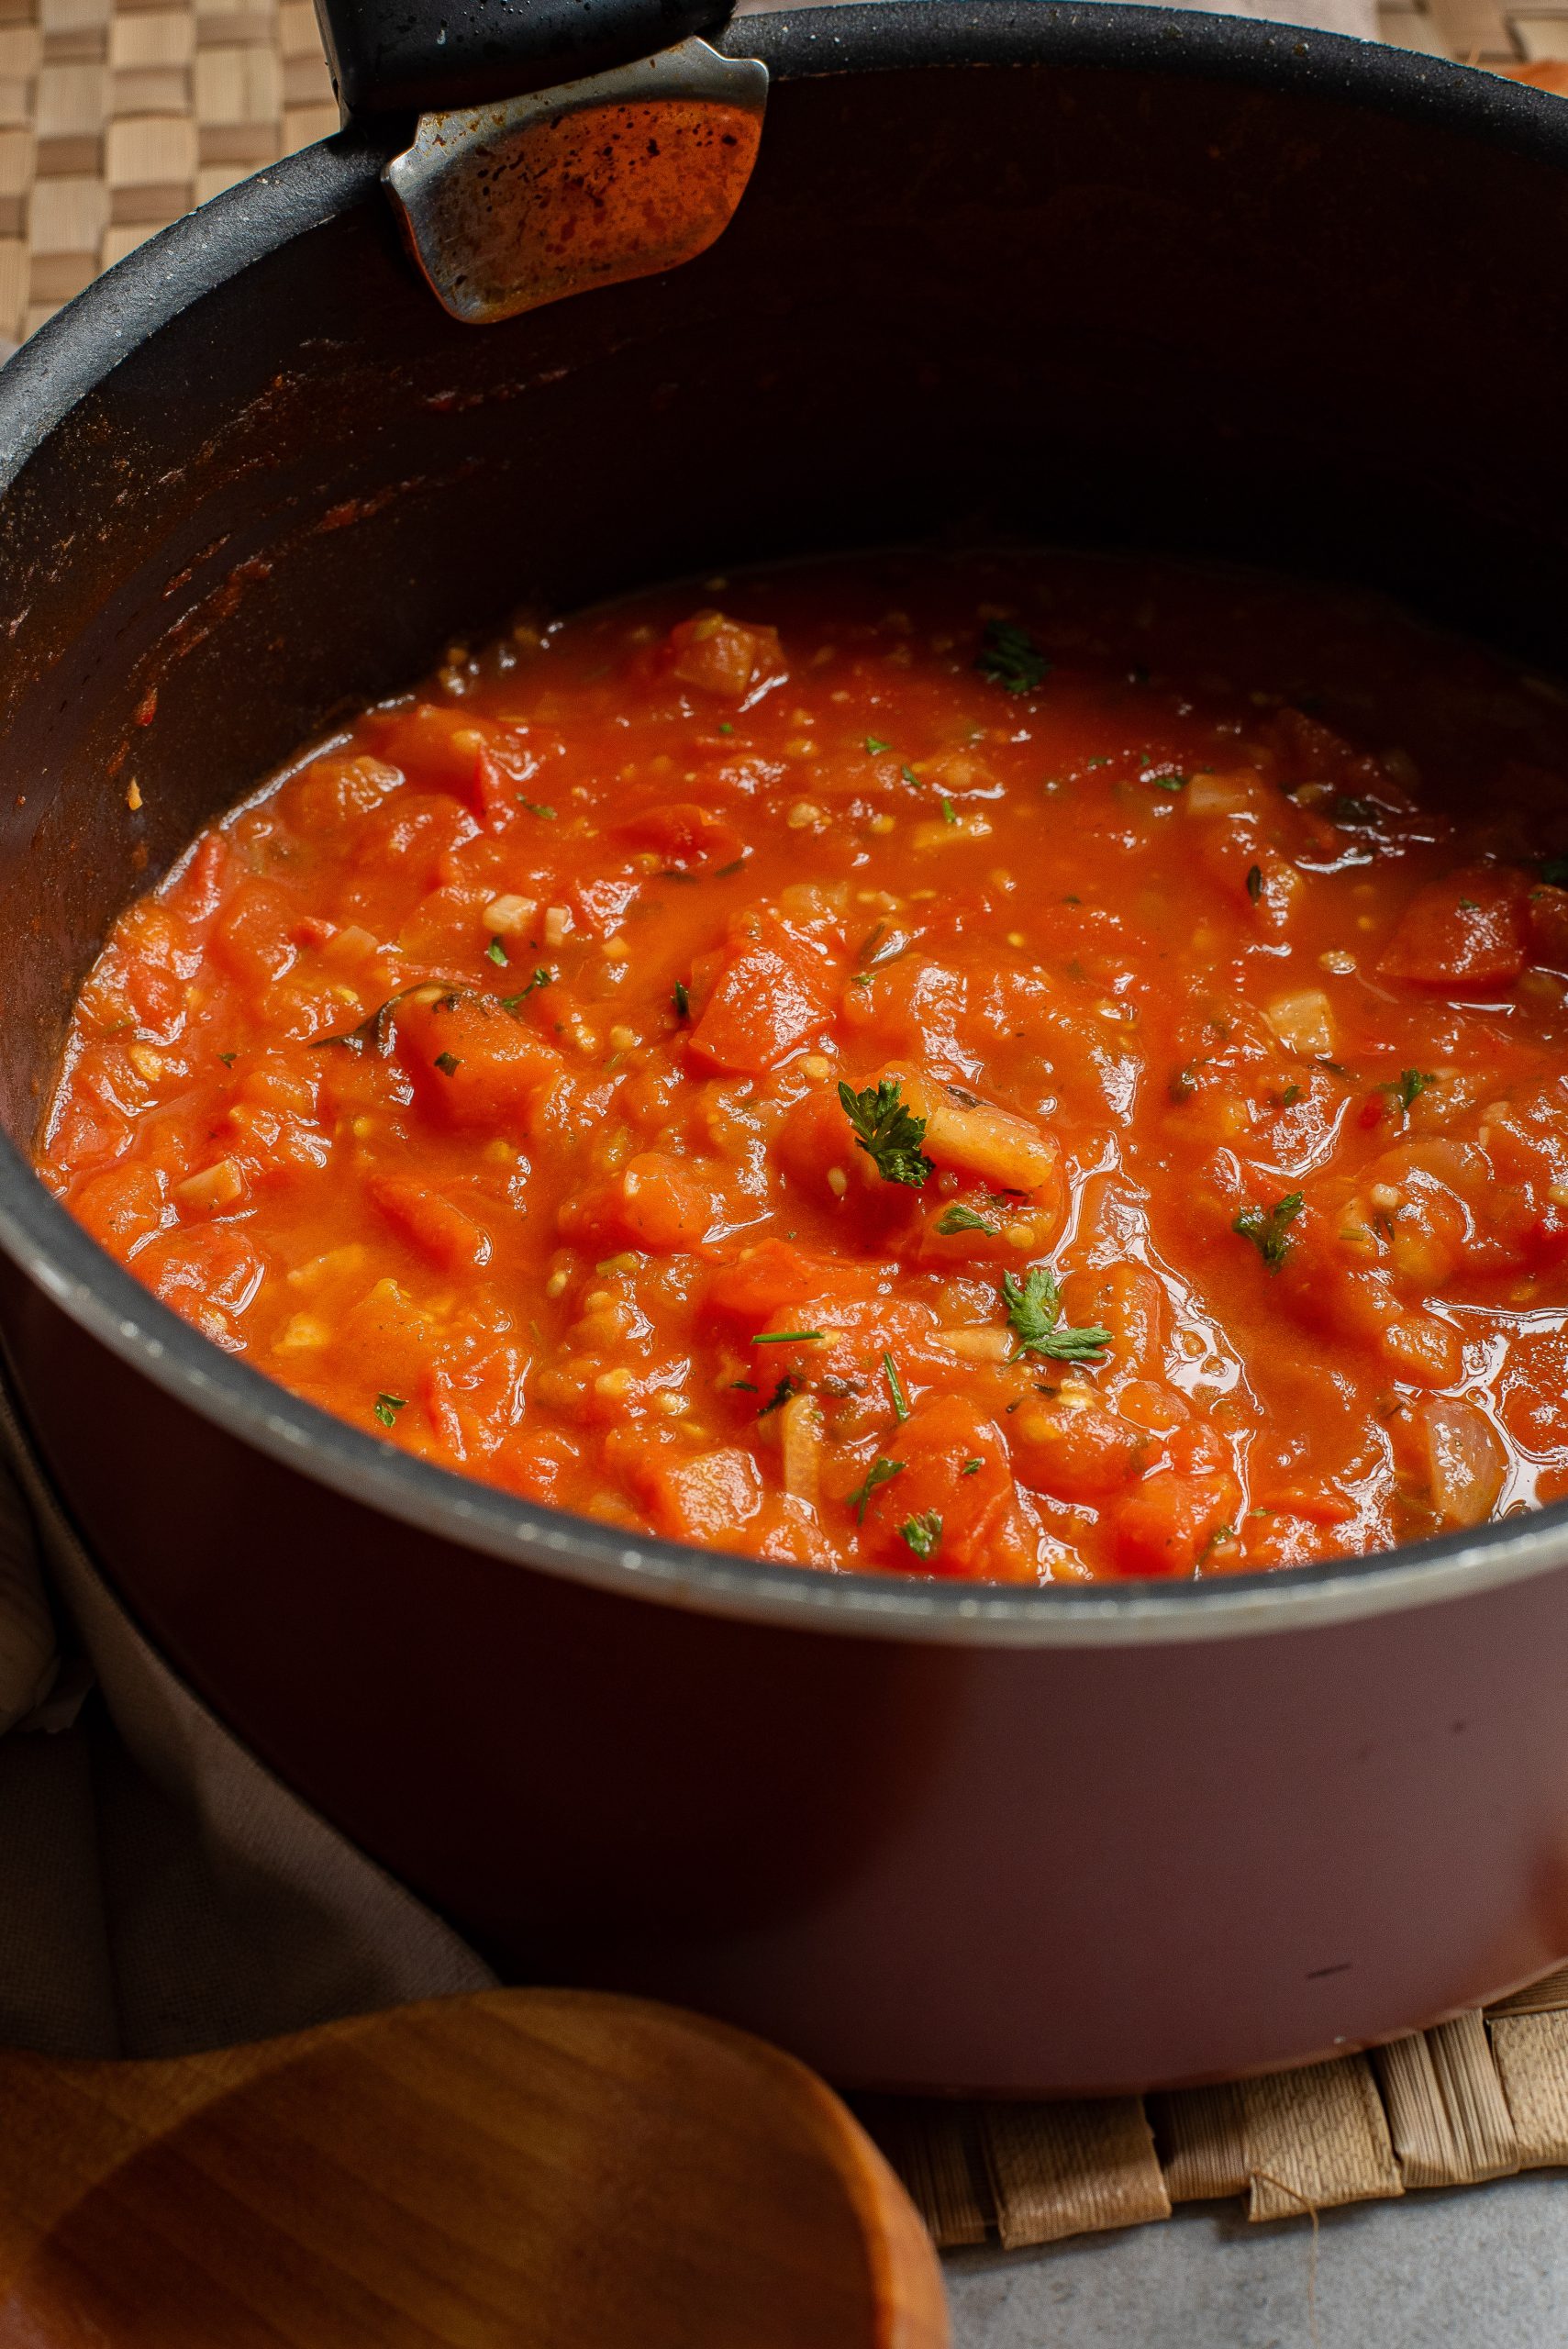 A pot of freshly cooked Simple Homemade Marinara Sauce garnished with herbs, with a wooden spoon on the side.